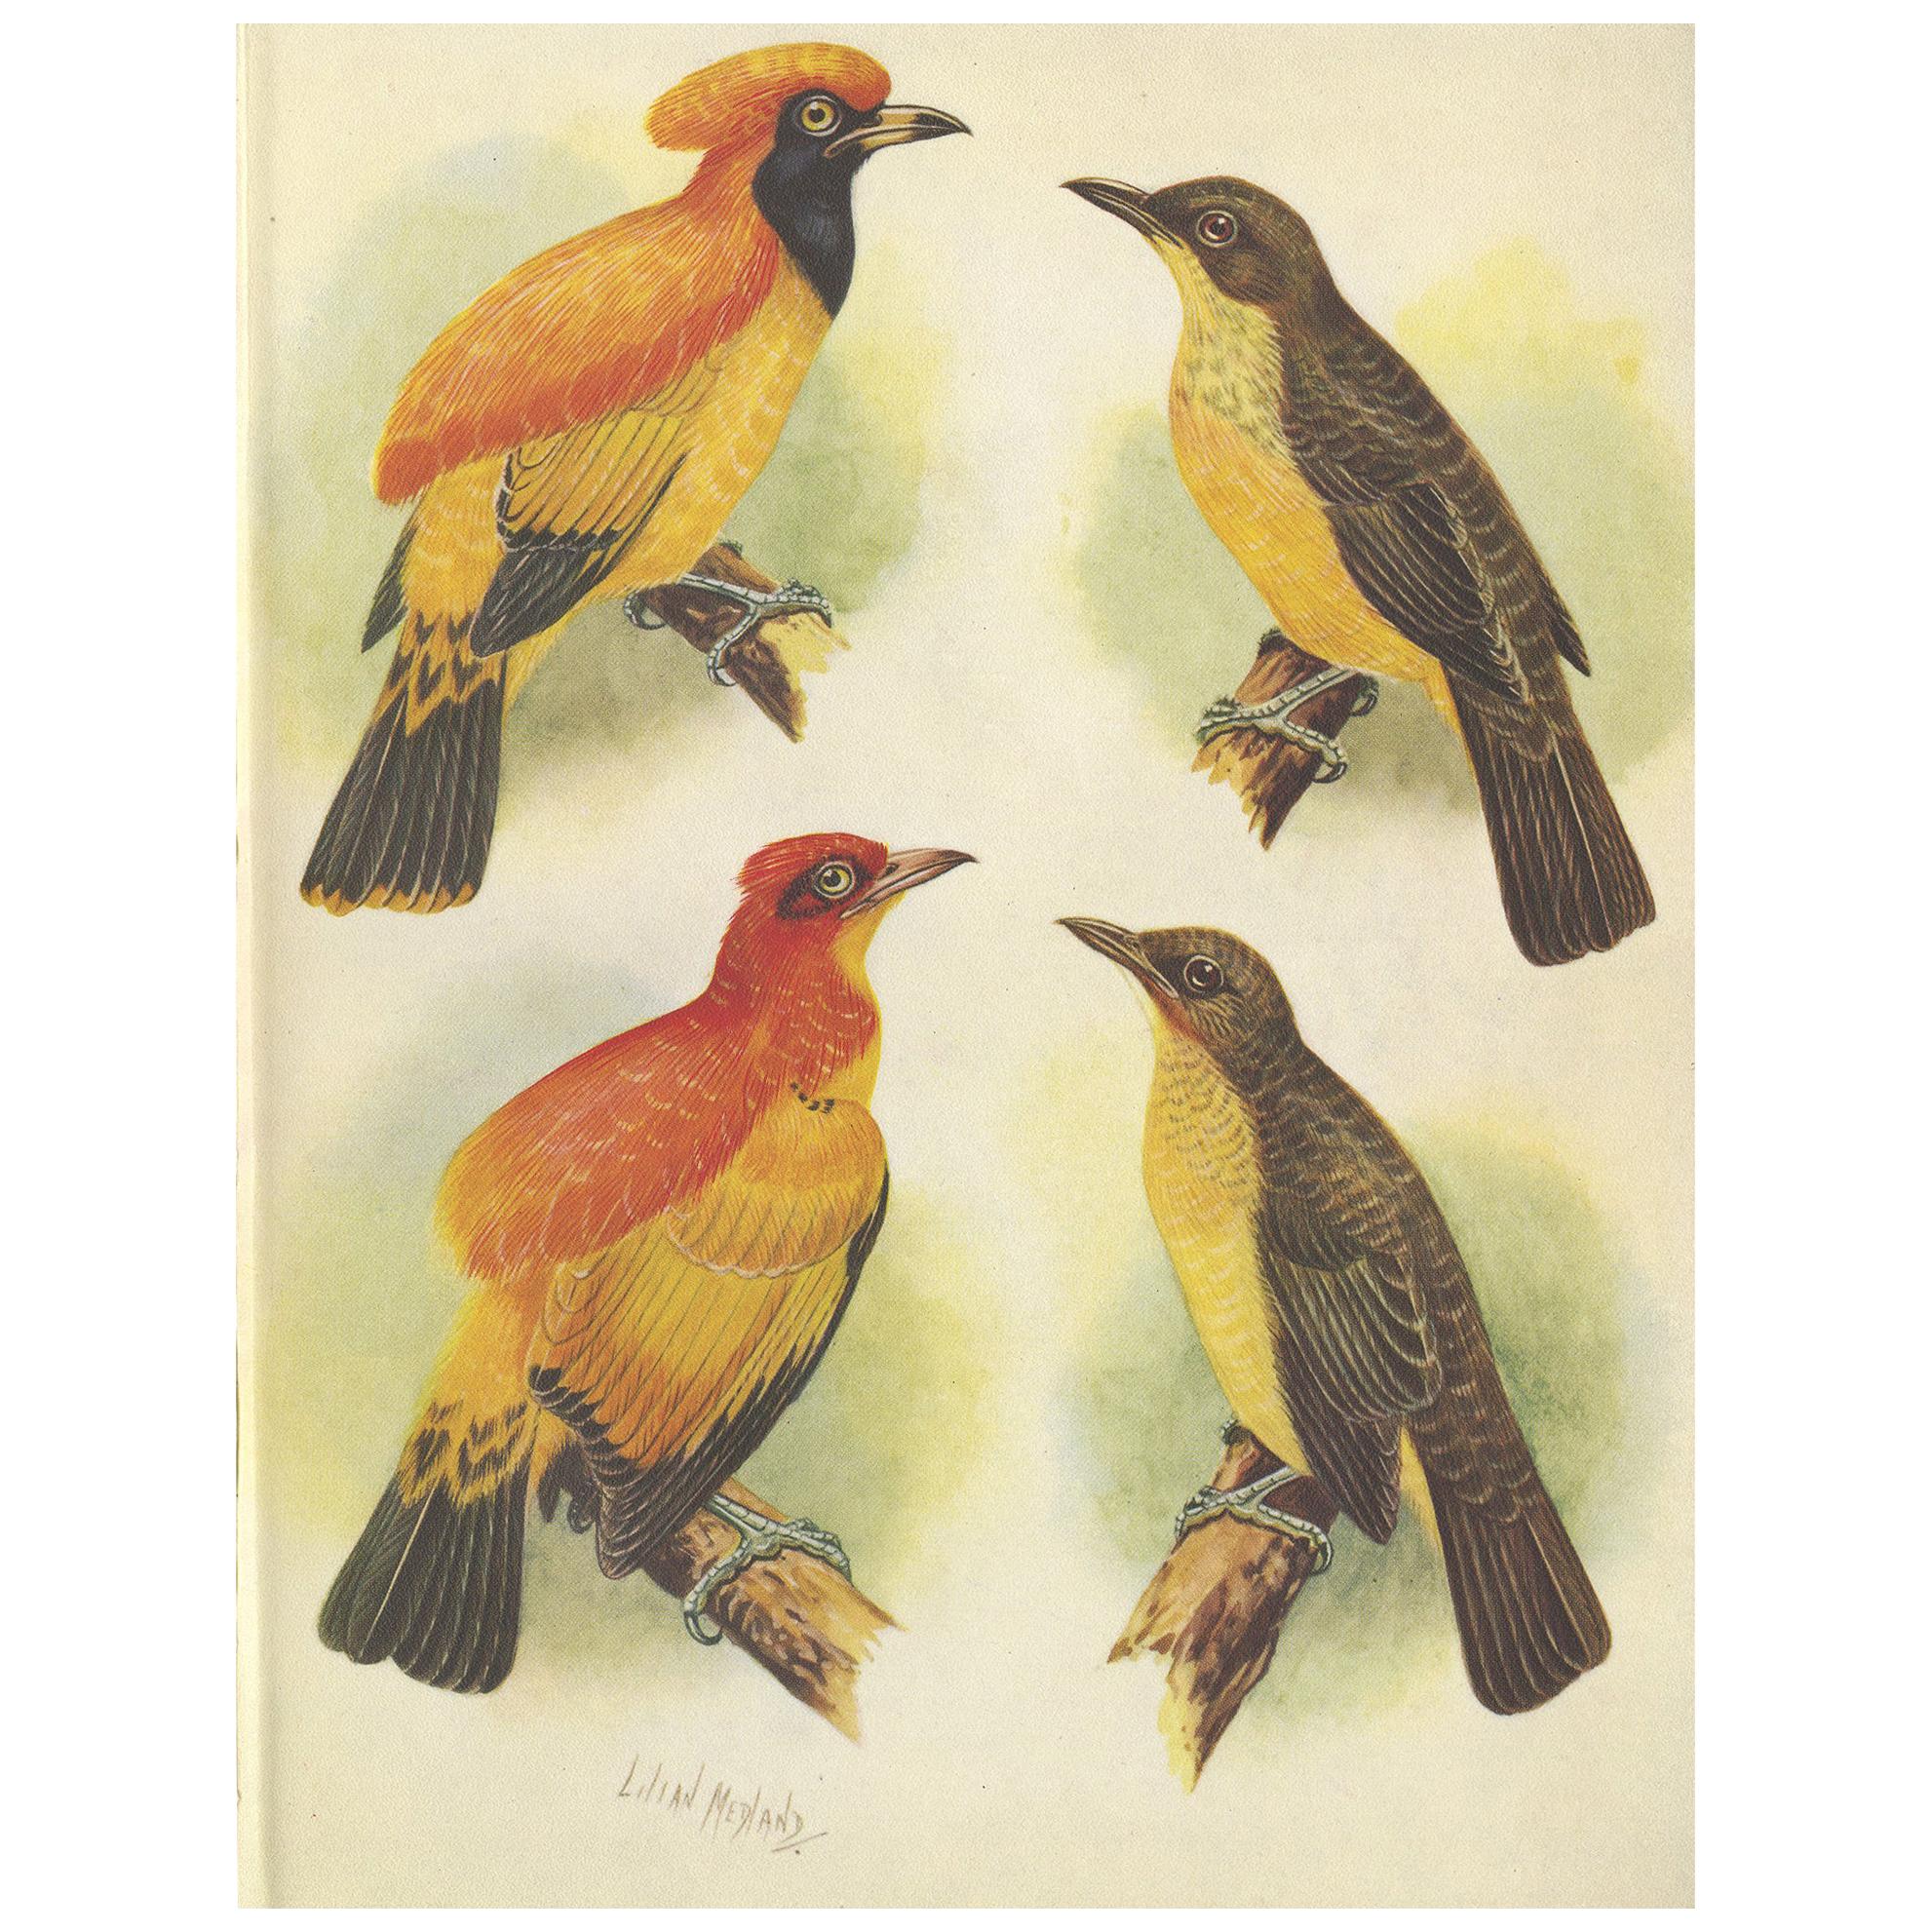 Antique Print of the Golden Bird and the Yellow-Throated Golden Bird, 1950